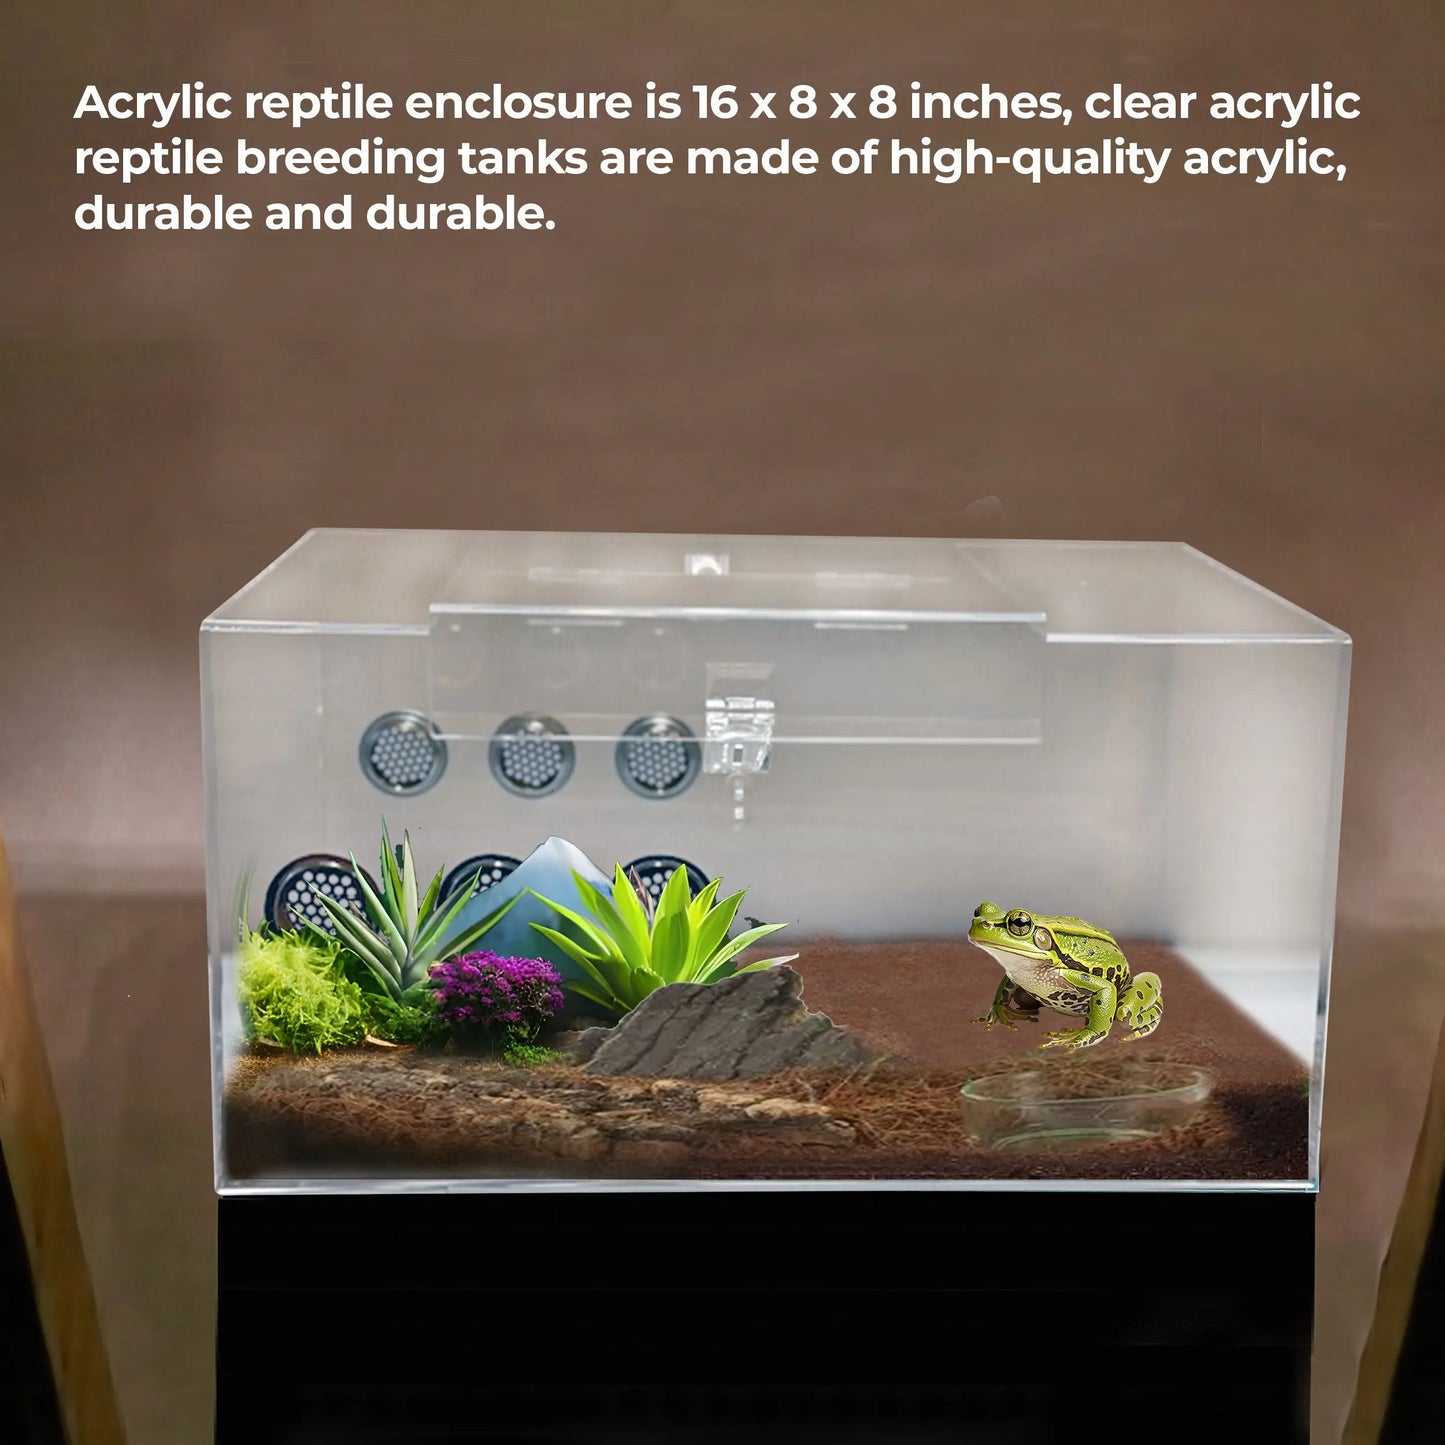 Talis-us Acrylic Tarantula Enclosure Transparent Terrariums Horizontal or Vertical Style for Spider Reptile Insect 8” x 8” x 16” Talis Us